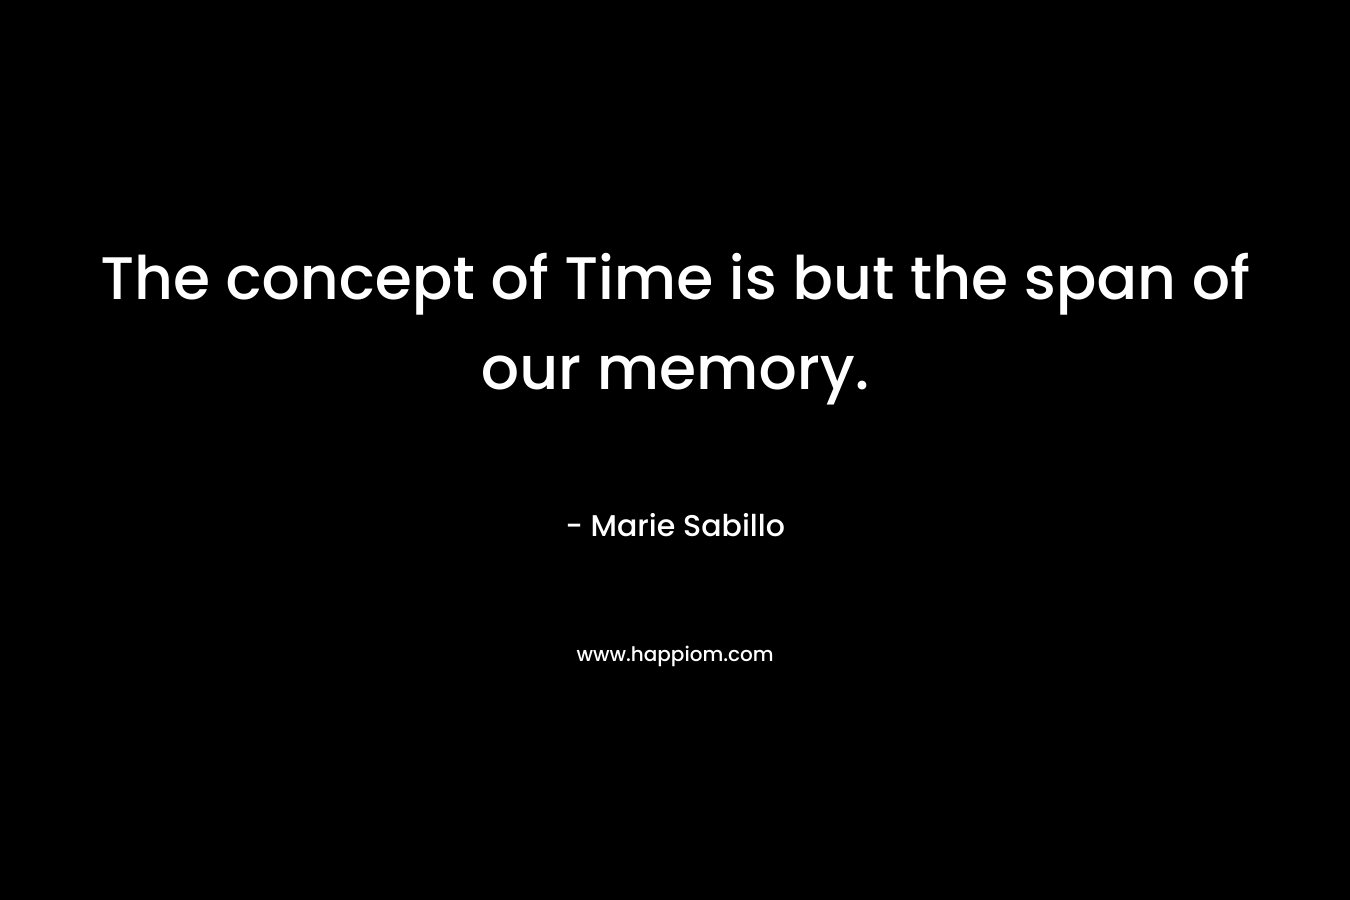 The concept of Time is but the span of our memory.